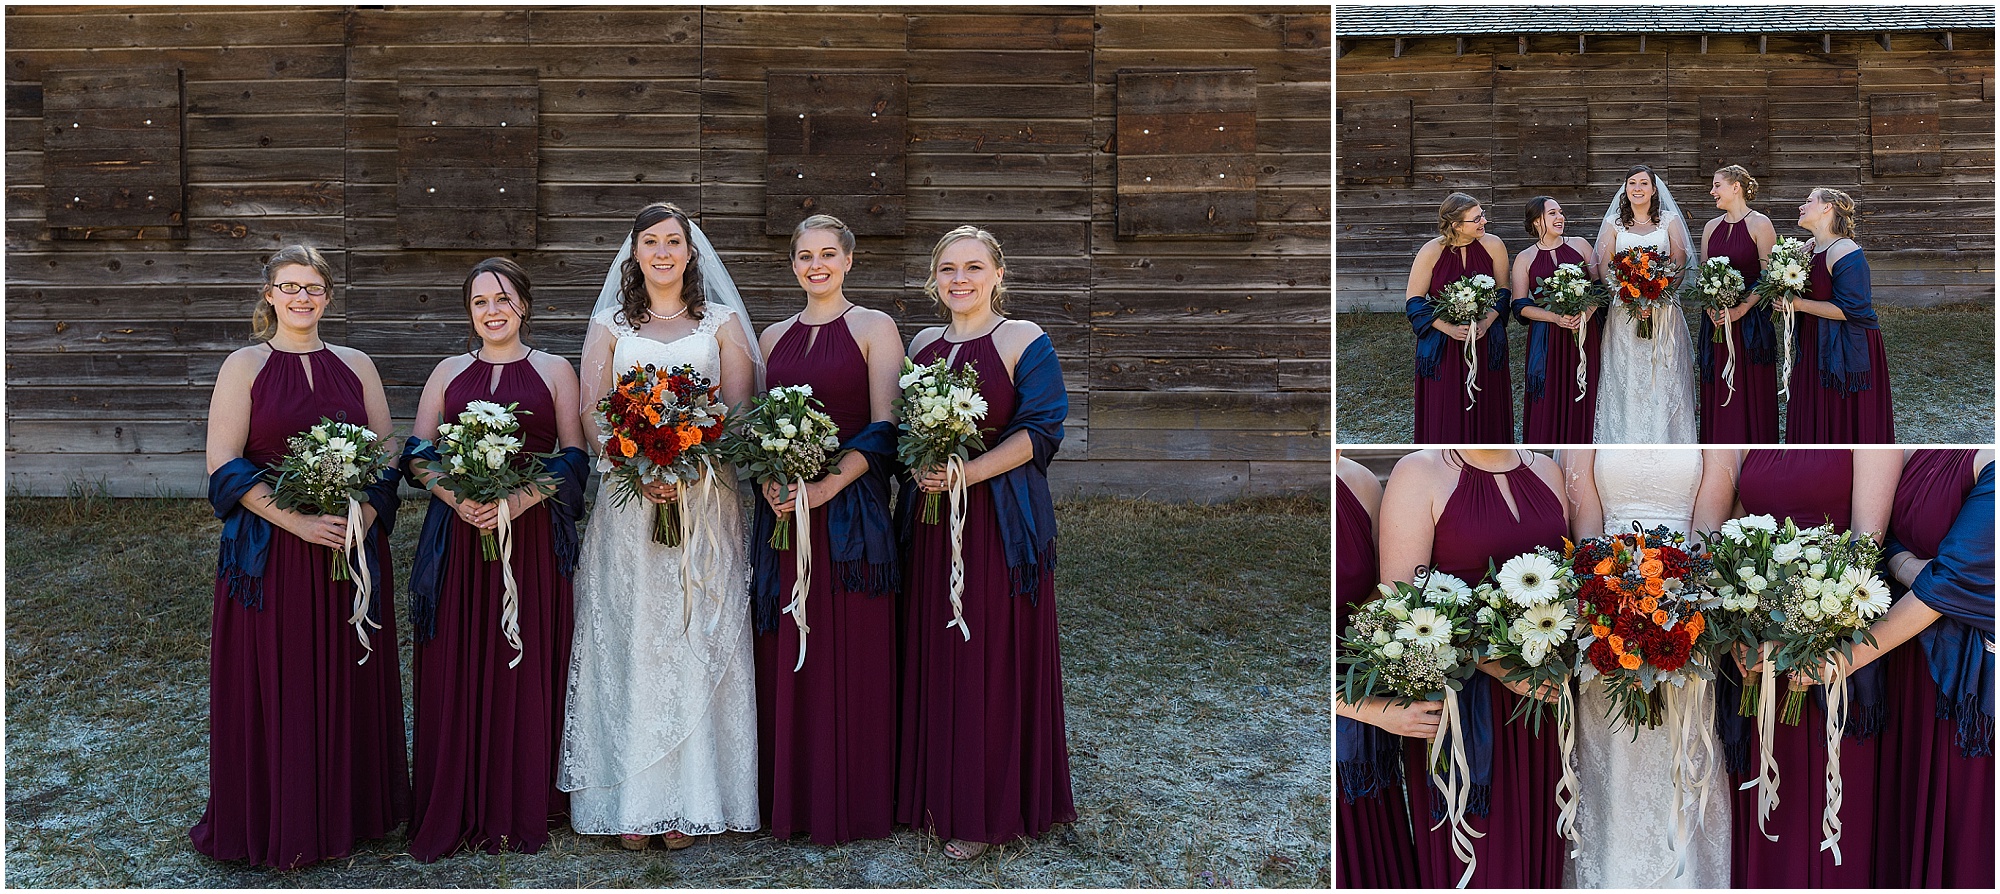 Gorgeous bridesmaids wearing maroon Bill Levkoff dresses pose outside the rustic Hollinshead Barn Fall wedding venue in Bend, Oregon. | Erica Swantek Photography